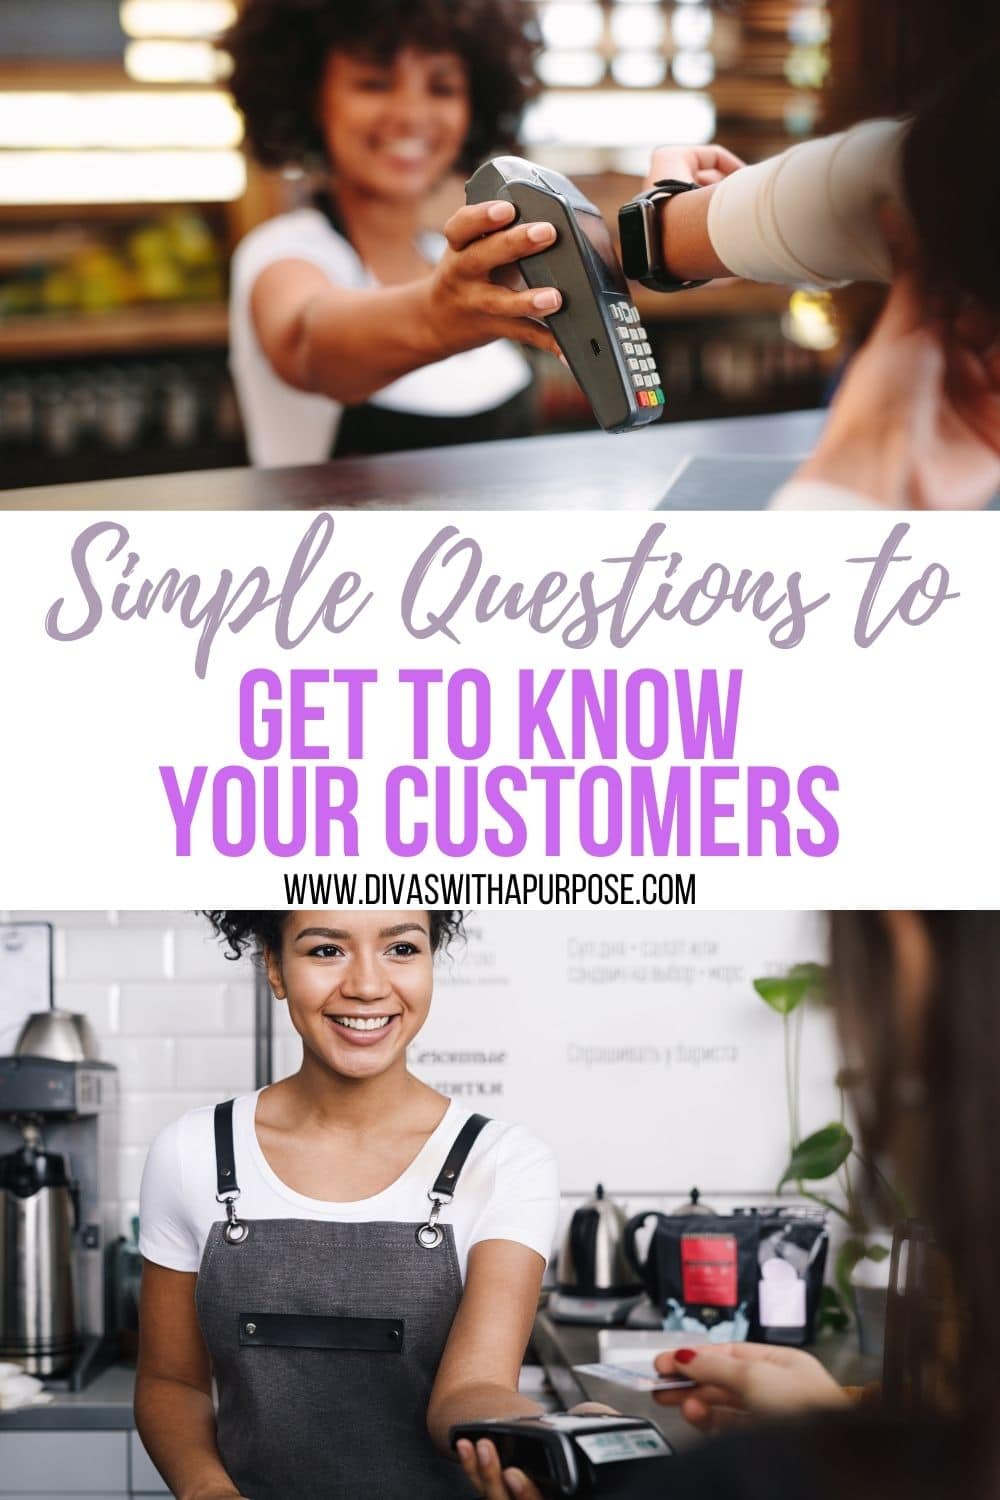 Social media is a great way to connect and get to know your customers. Here are some simple questions you can ask to do just that. #bizboost #marketing